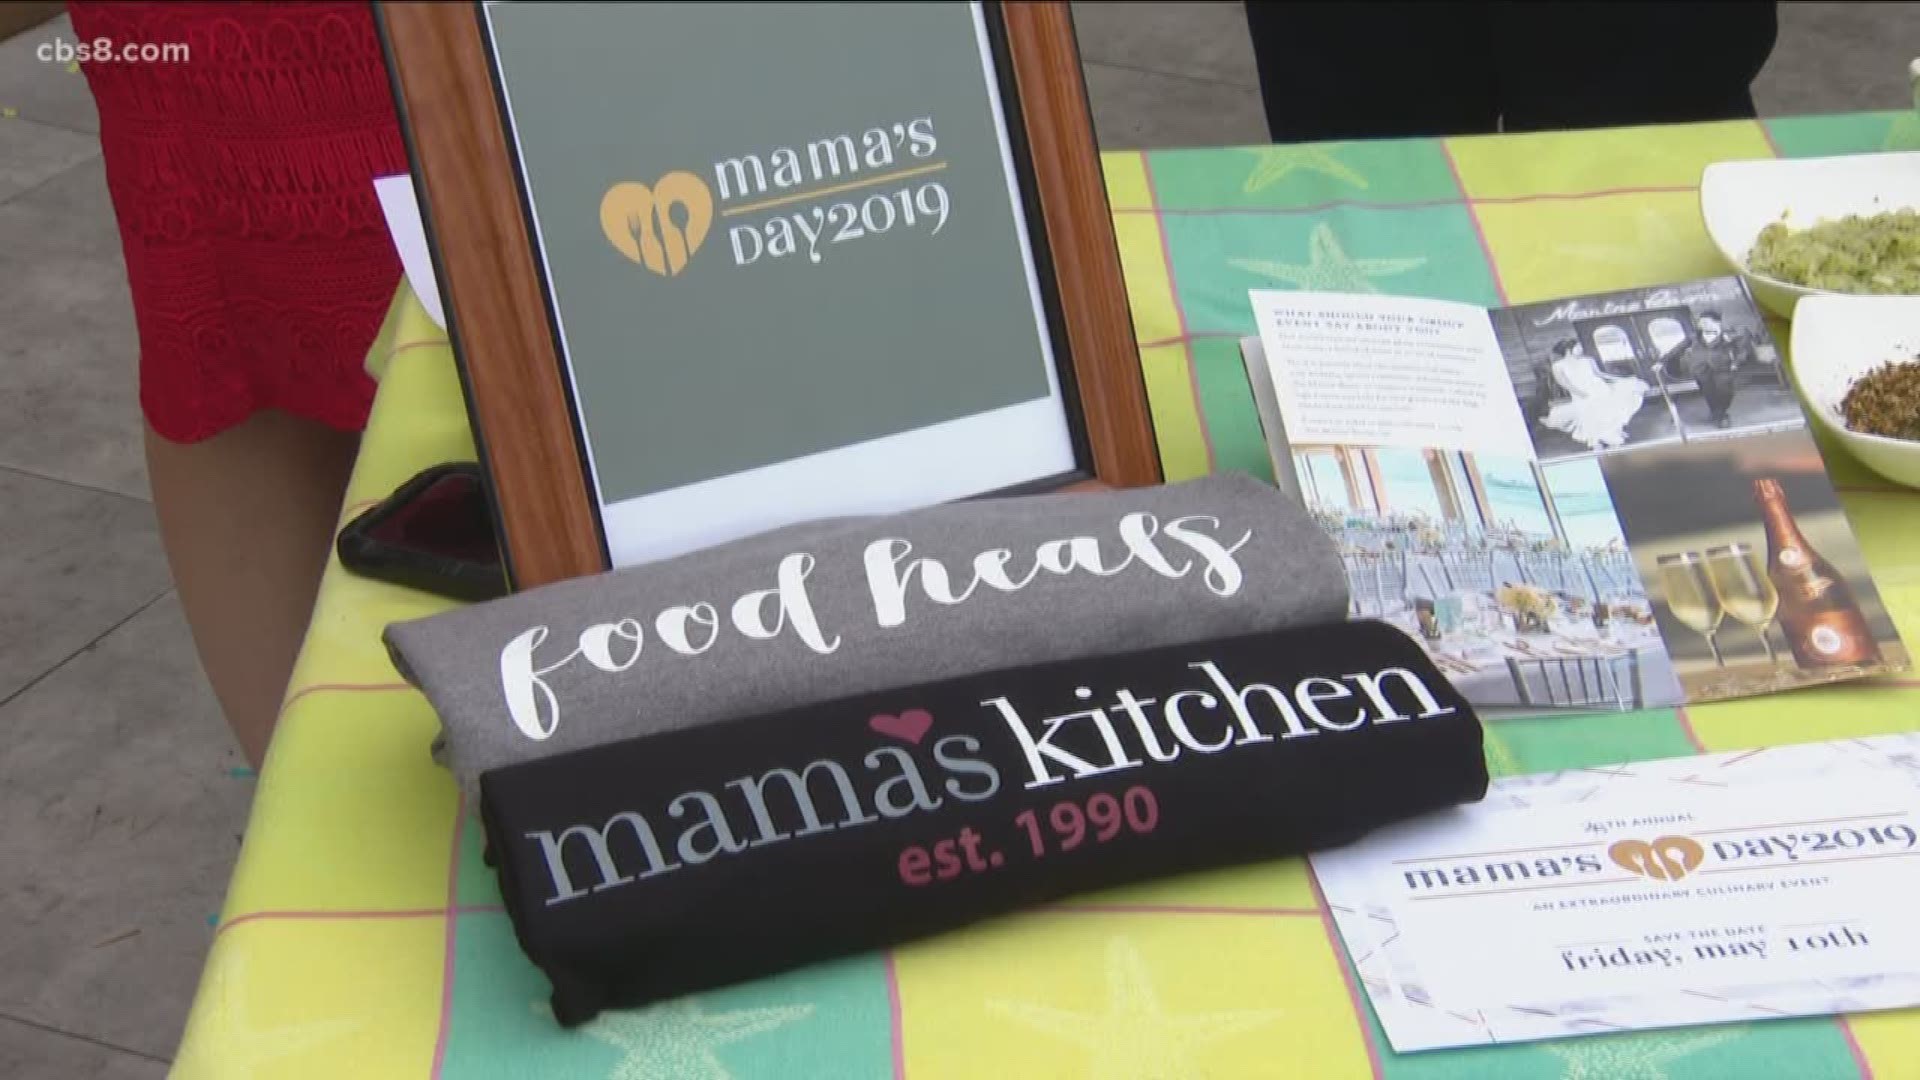 The annual tasting event held the Friday before Mother’s Day raises money for Mama’s Kitchen which provides delivered meals, pantry services and nutrition education services to over 1,200 men, women and children in San Diego County annually.